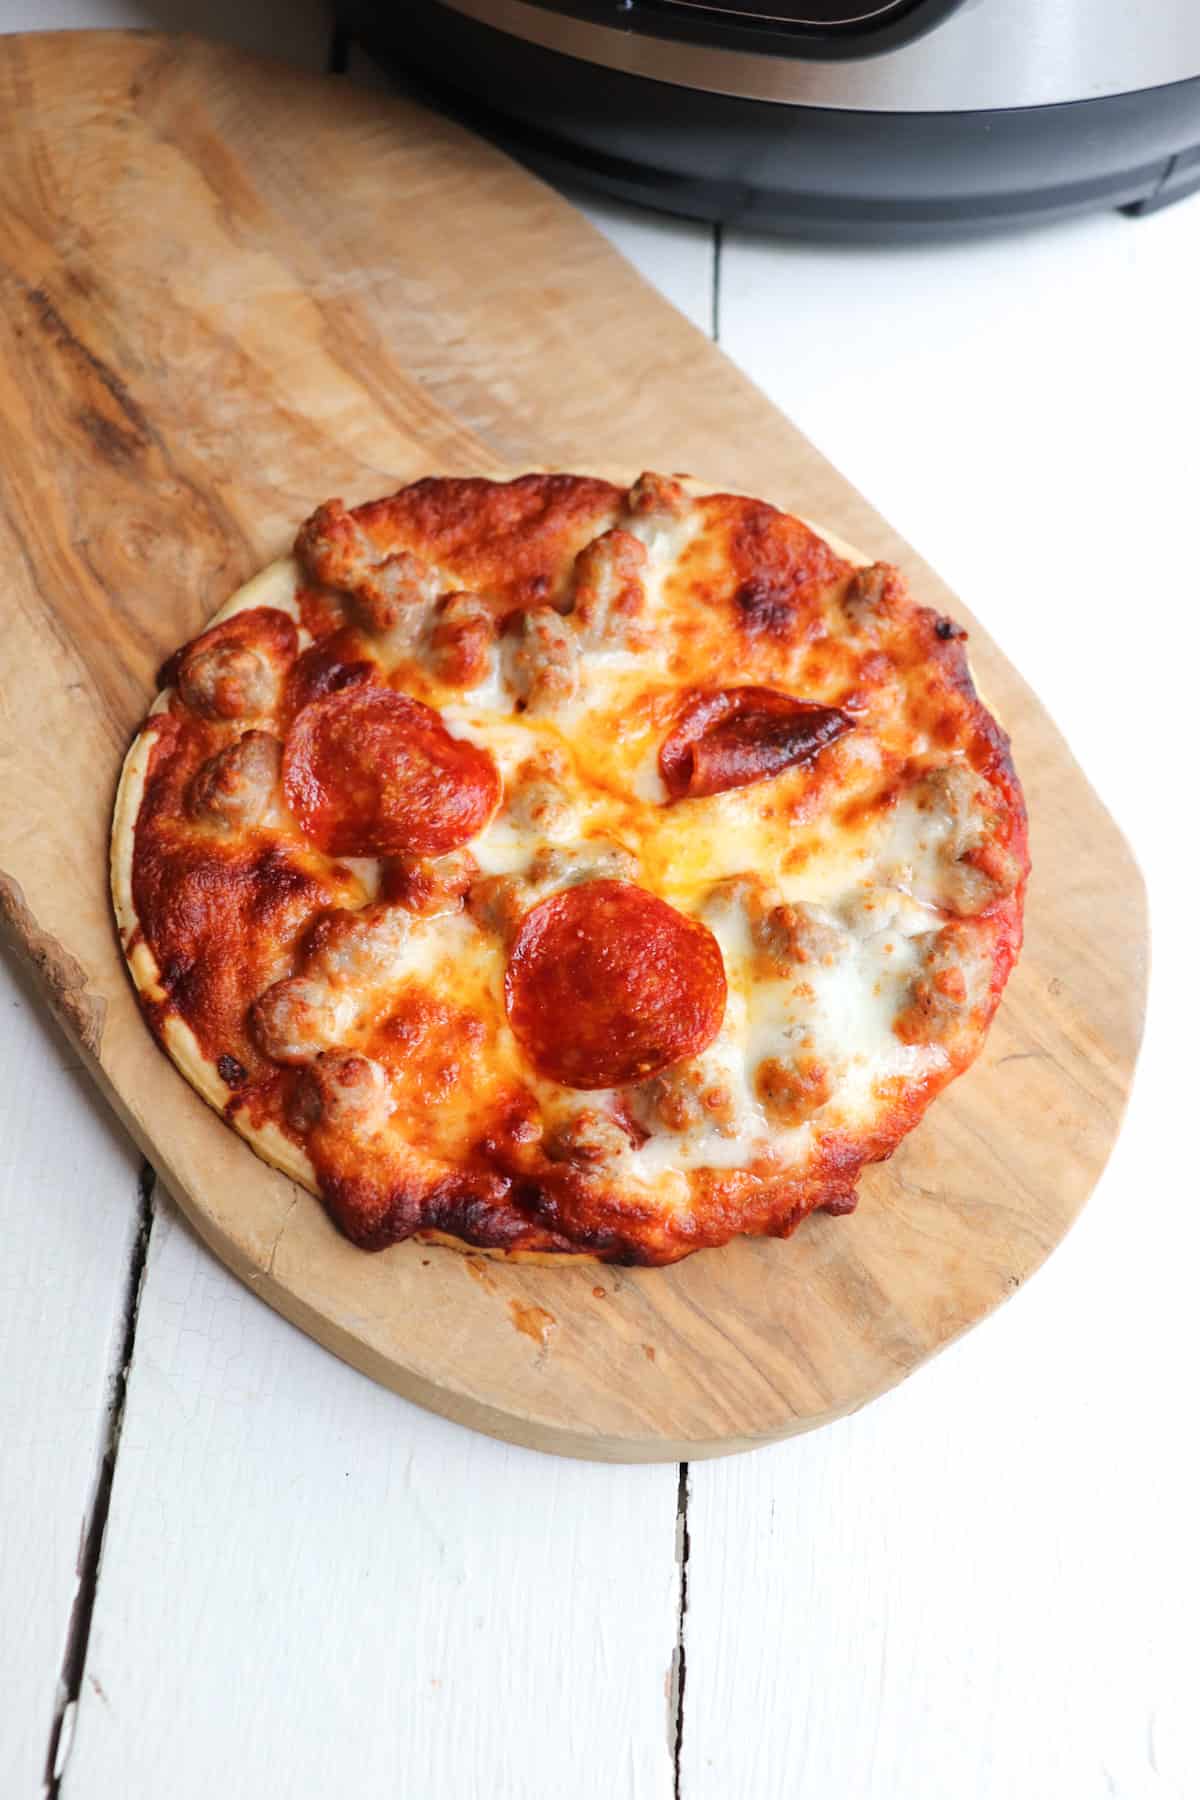 cooked mini pizza on a wooden cutting board.